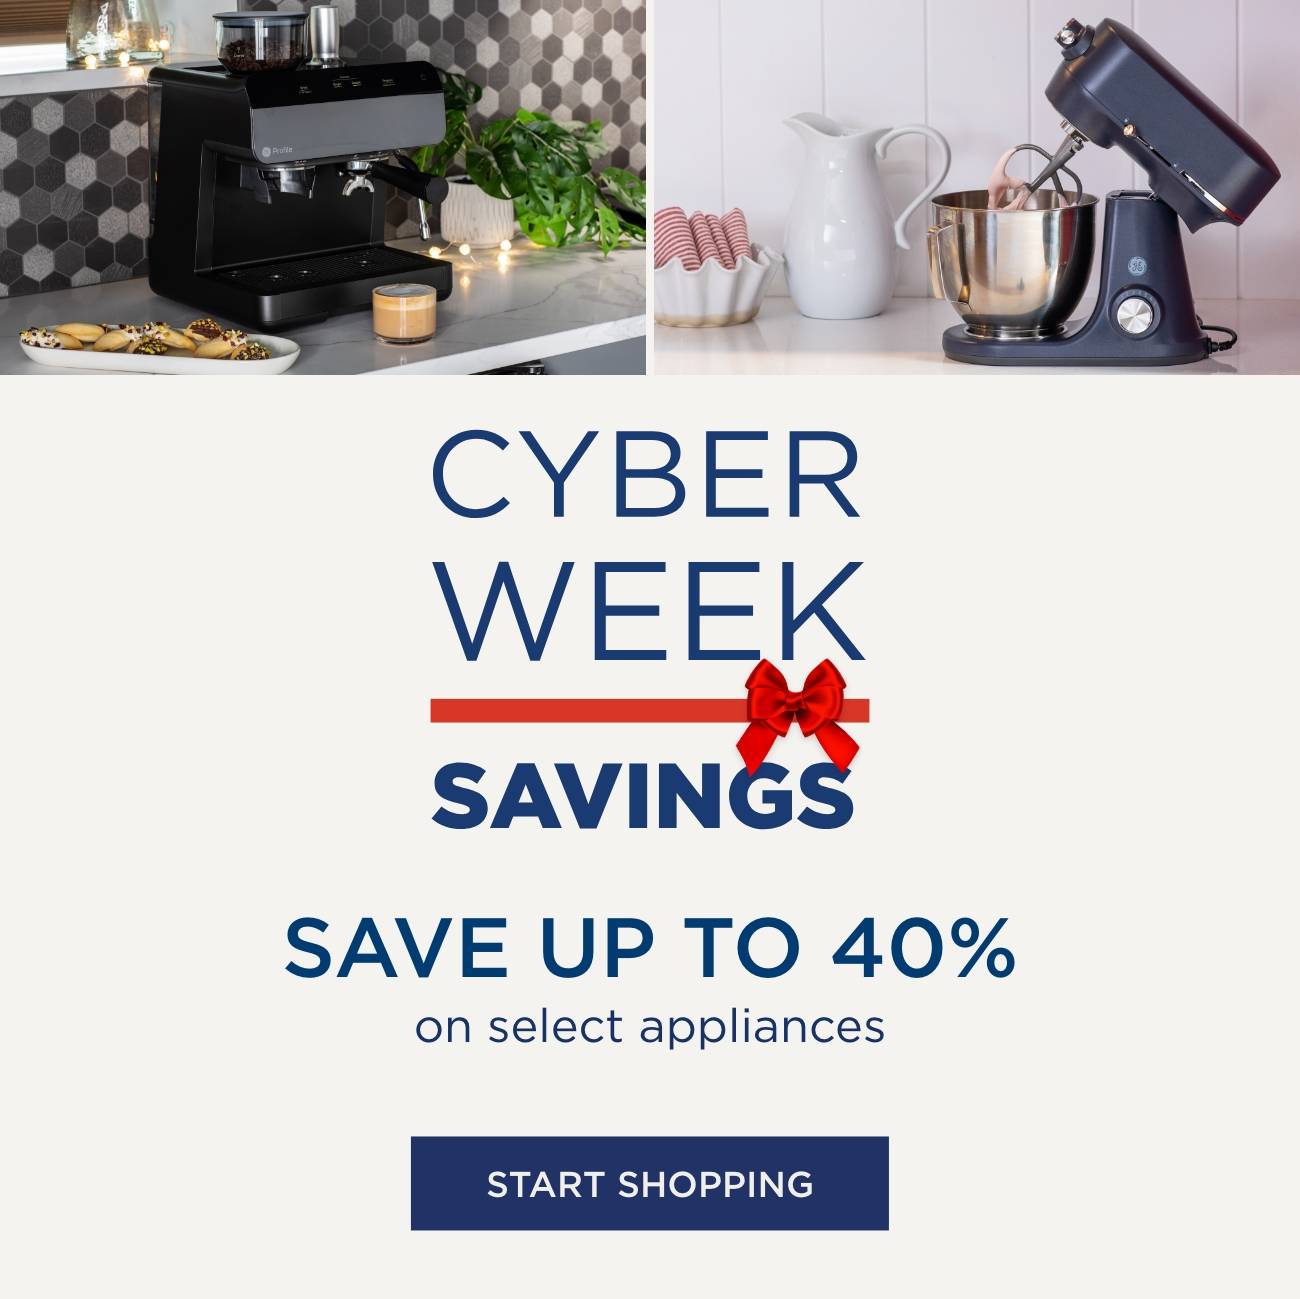 Cyber Week Savings - Save up to 40% on select appliances